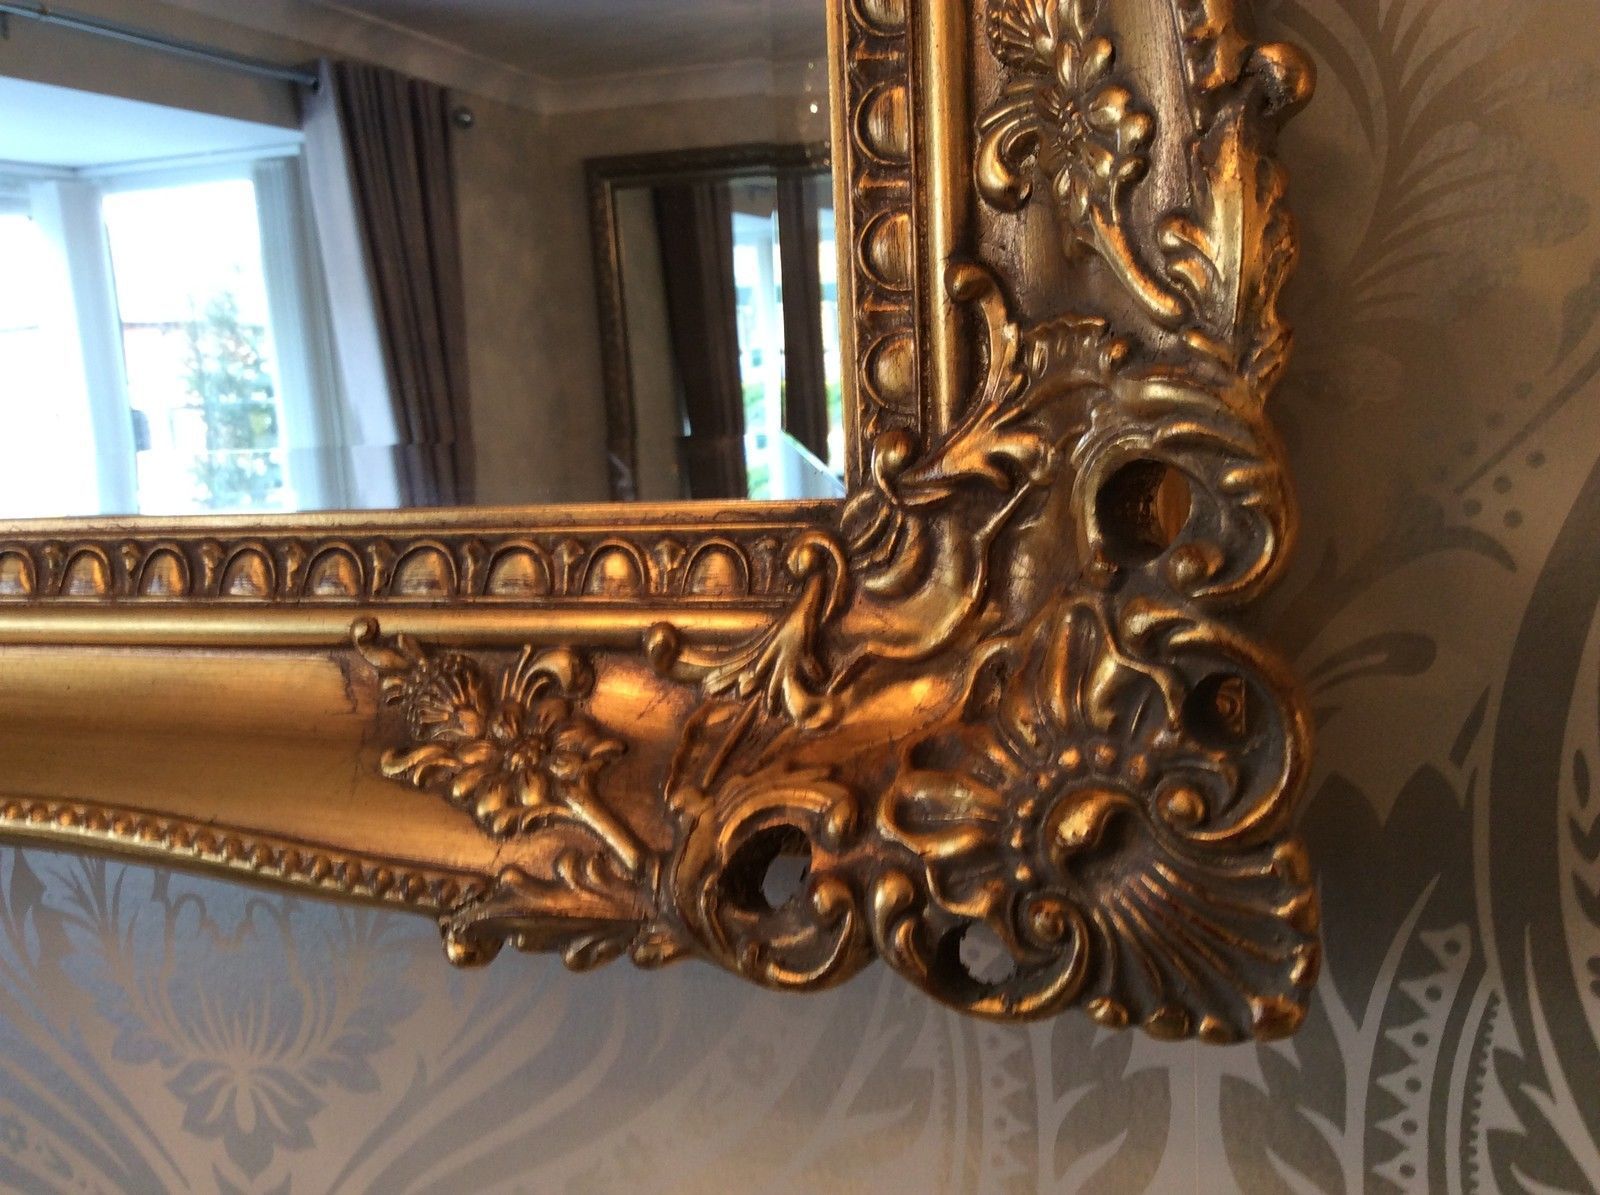 X Large Antique Gold Shabby Chic Ornate Decorative Wall Mirror Free Postage Within Gold Metal Mirrored Wall Art (View 11 of 15)